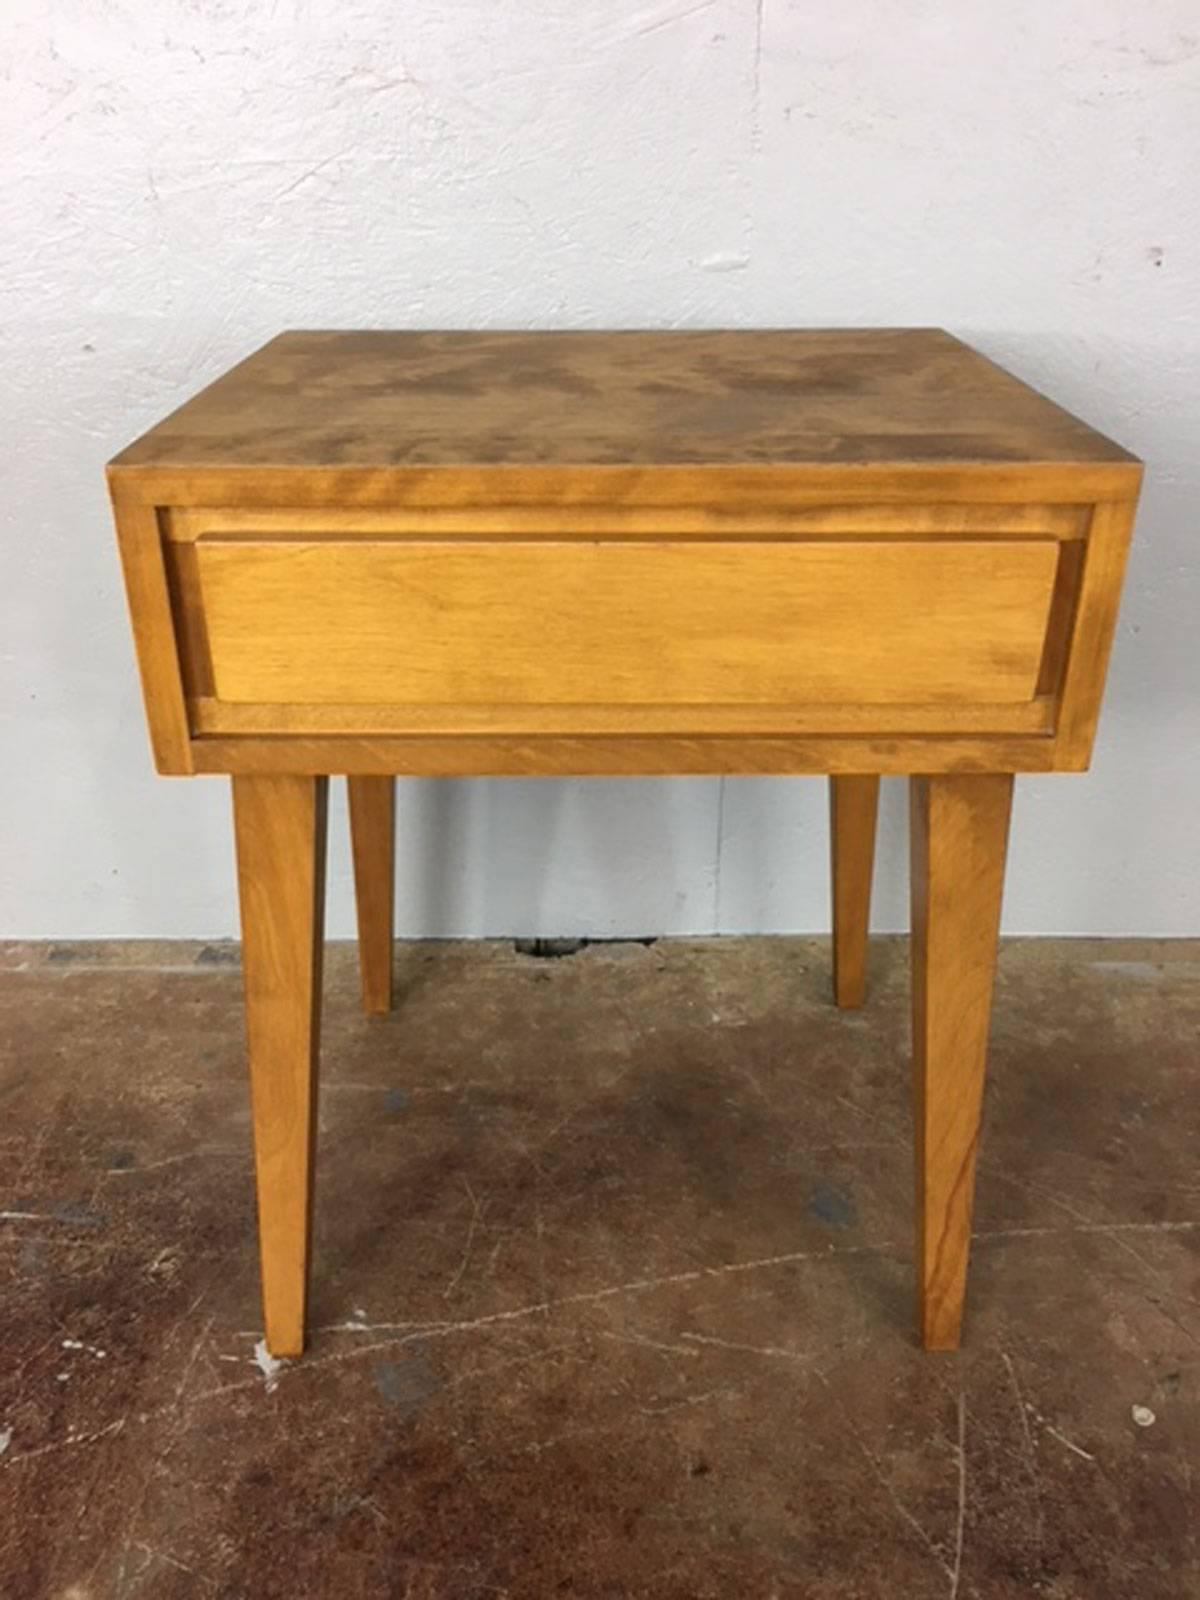 Conant Ball nightstand or end table with pull-out drawer, circa 1960s.